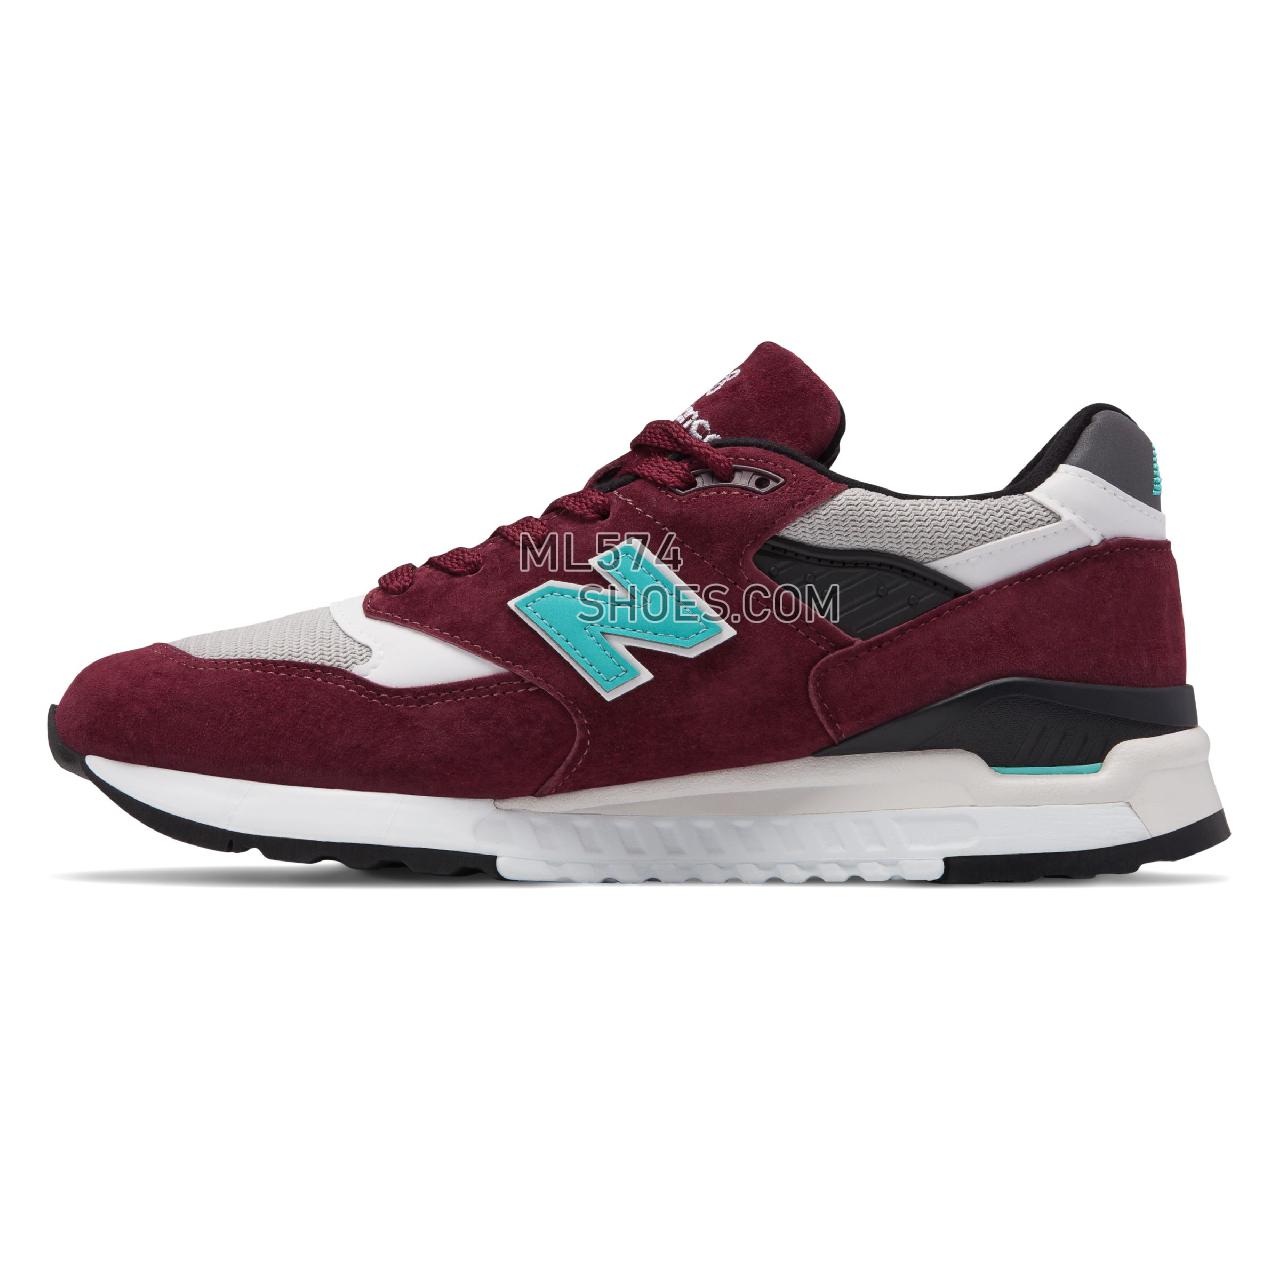 New Balance Made in US 998 - Men's 998 Made in US - Burgundy with Blue - M998AWC